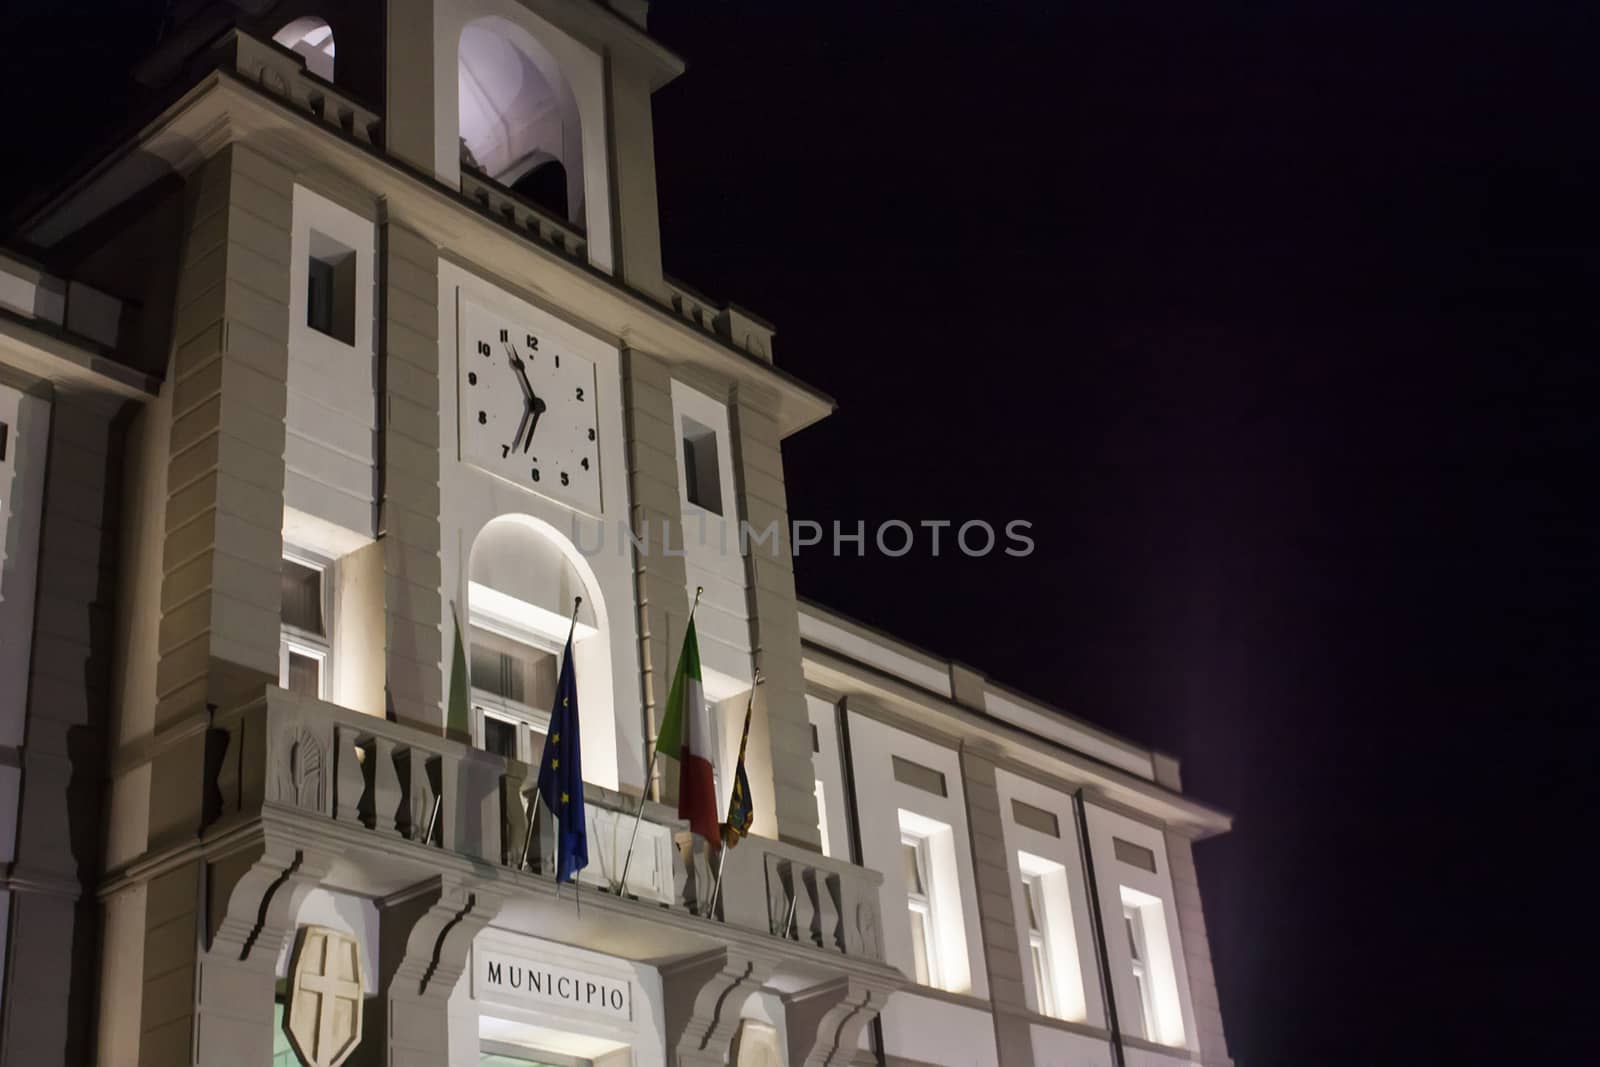 Town Hall of a small Italian country by pippocarlot